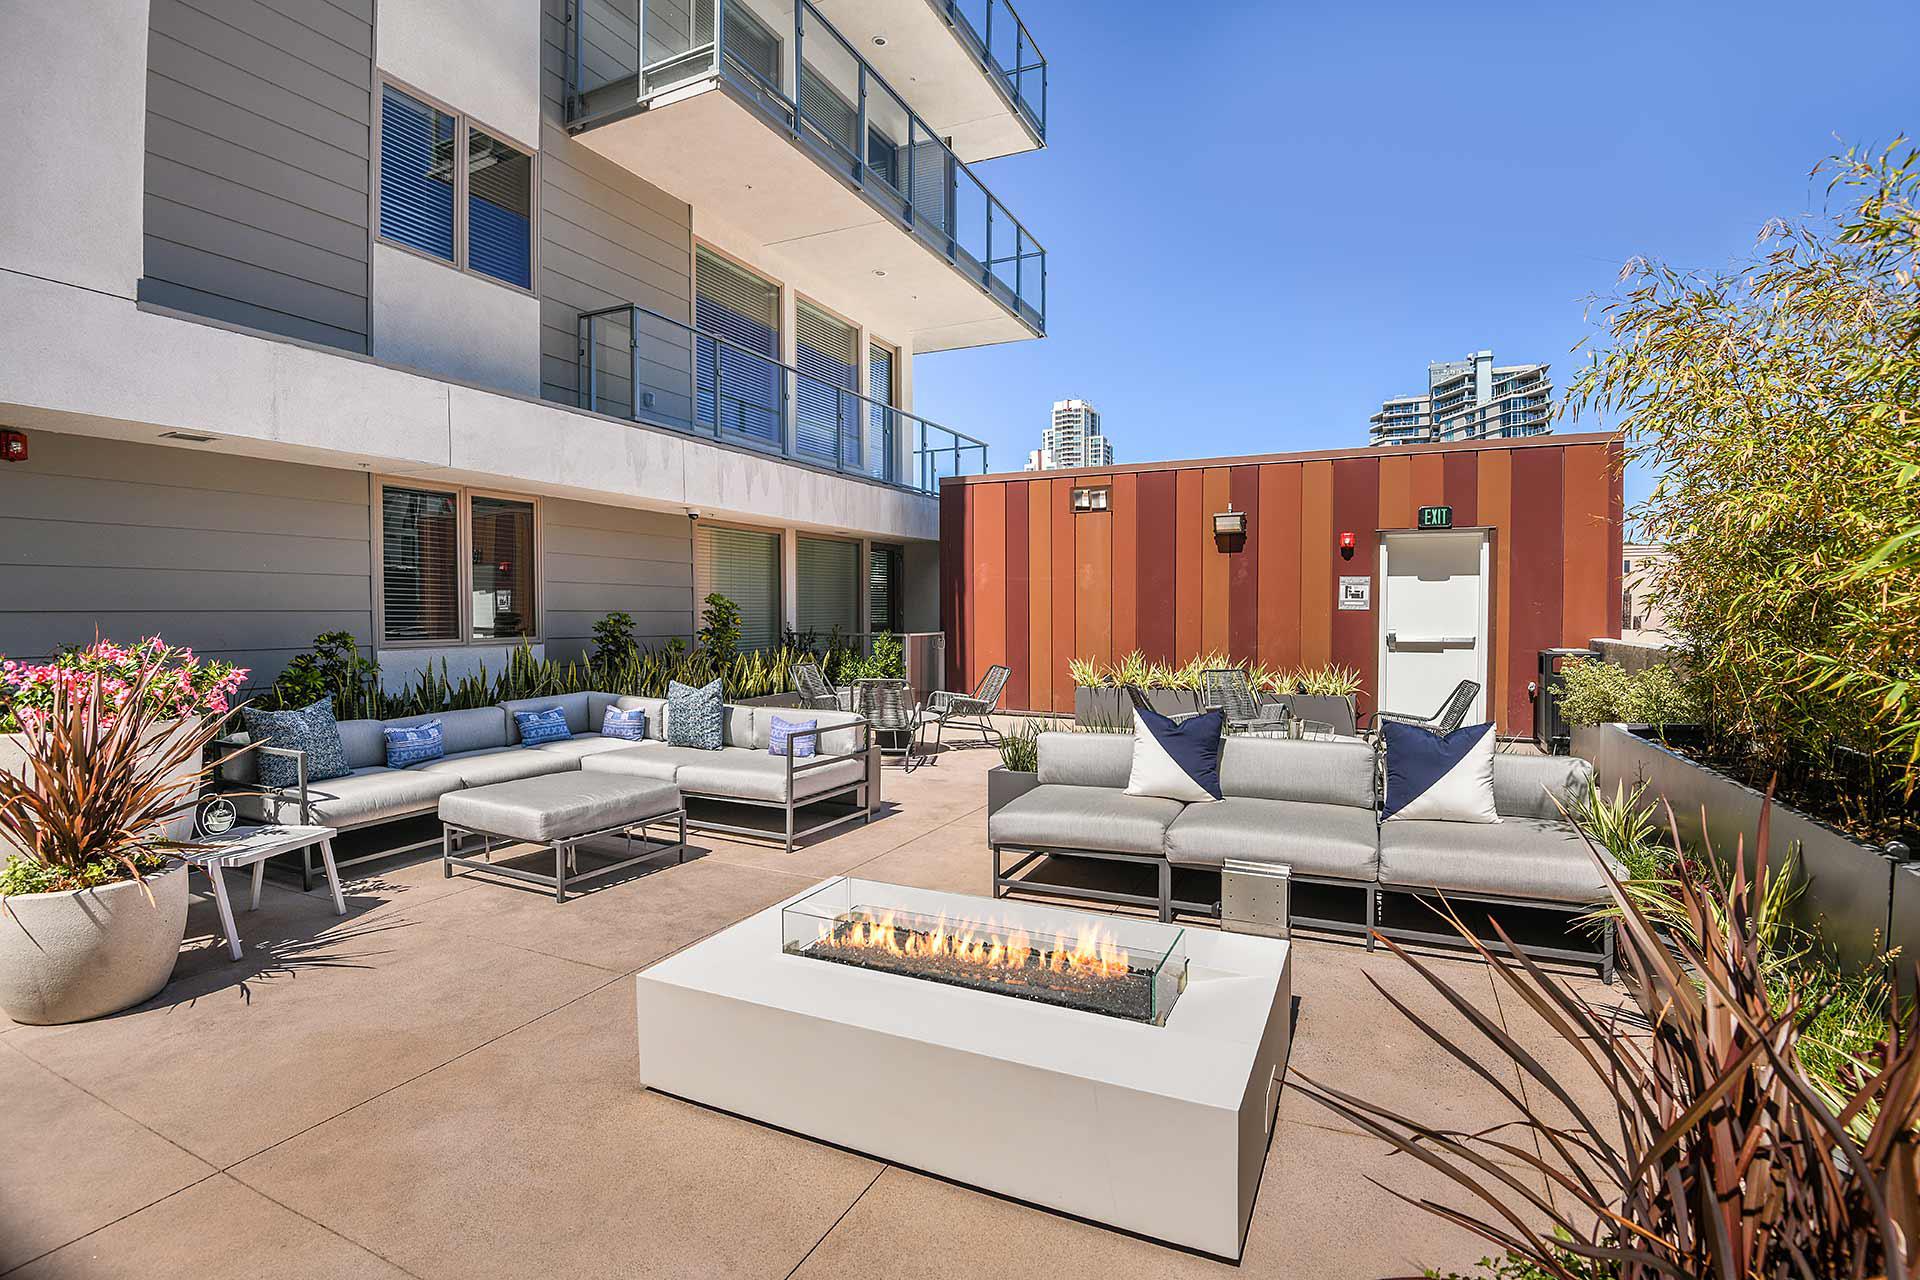 Terrace at F11 East Village Luxury Apartments in downtown San Diego, CA